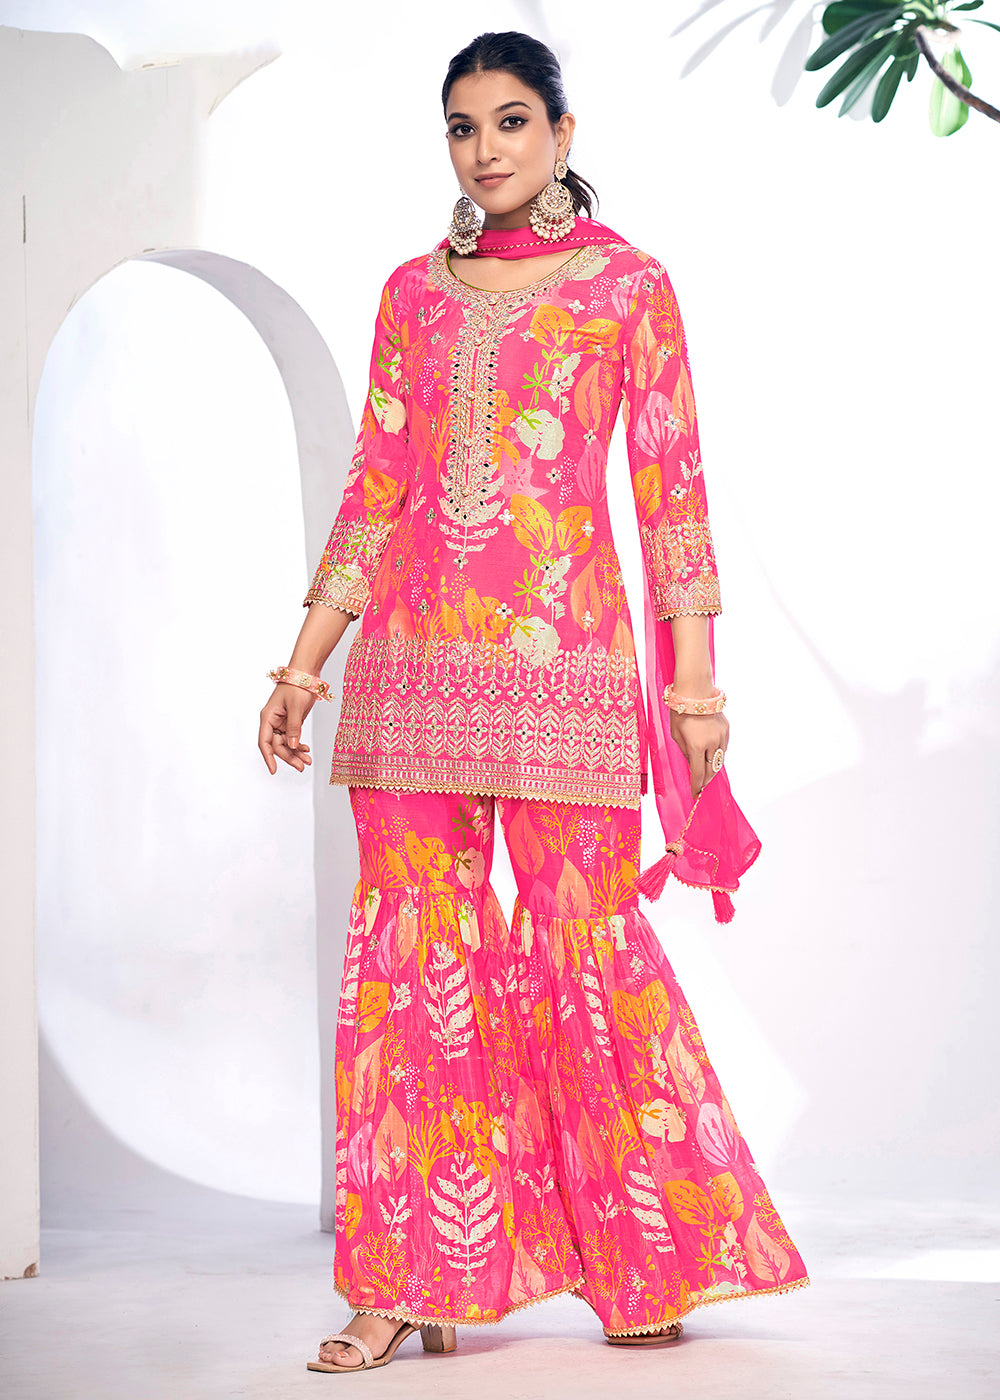 Shop Now Pink Embroidered & Printed Festive Gharara Suit Online at Empress Clothing in USA, UK, Canada, Italy & Worldwide.